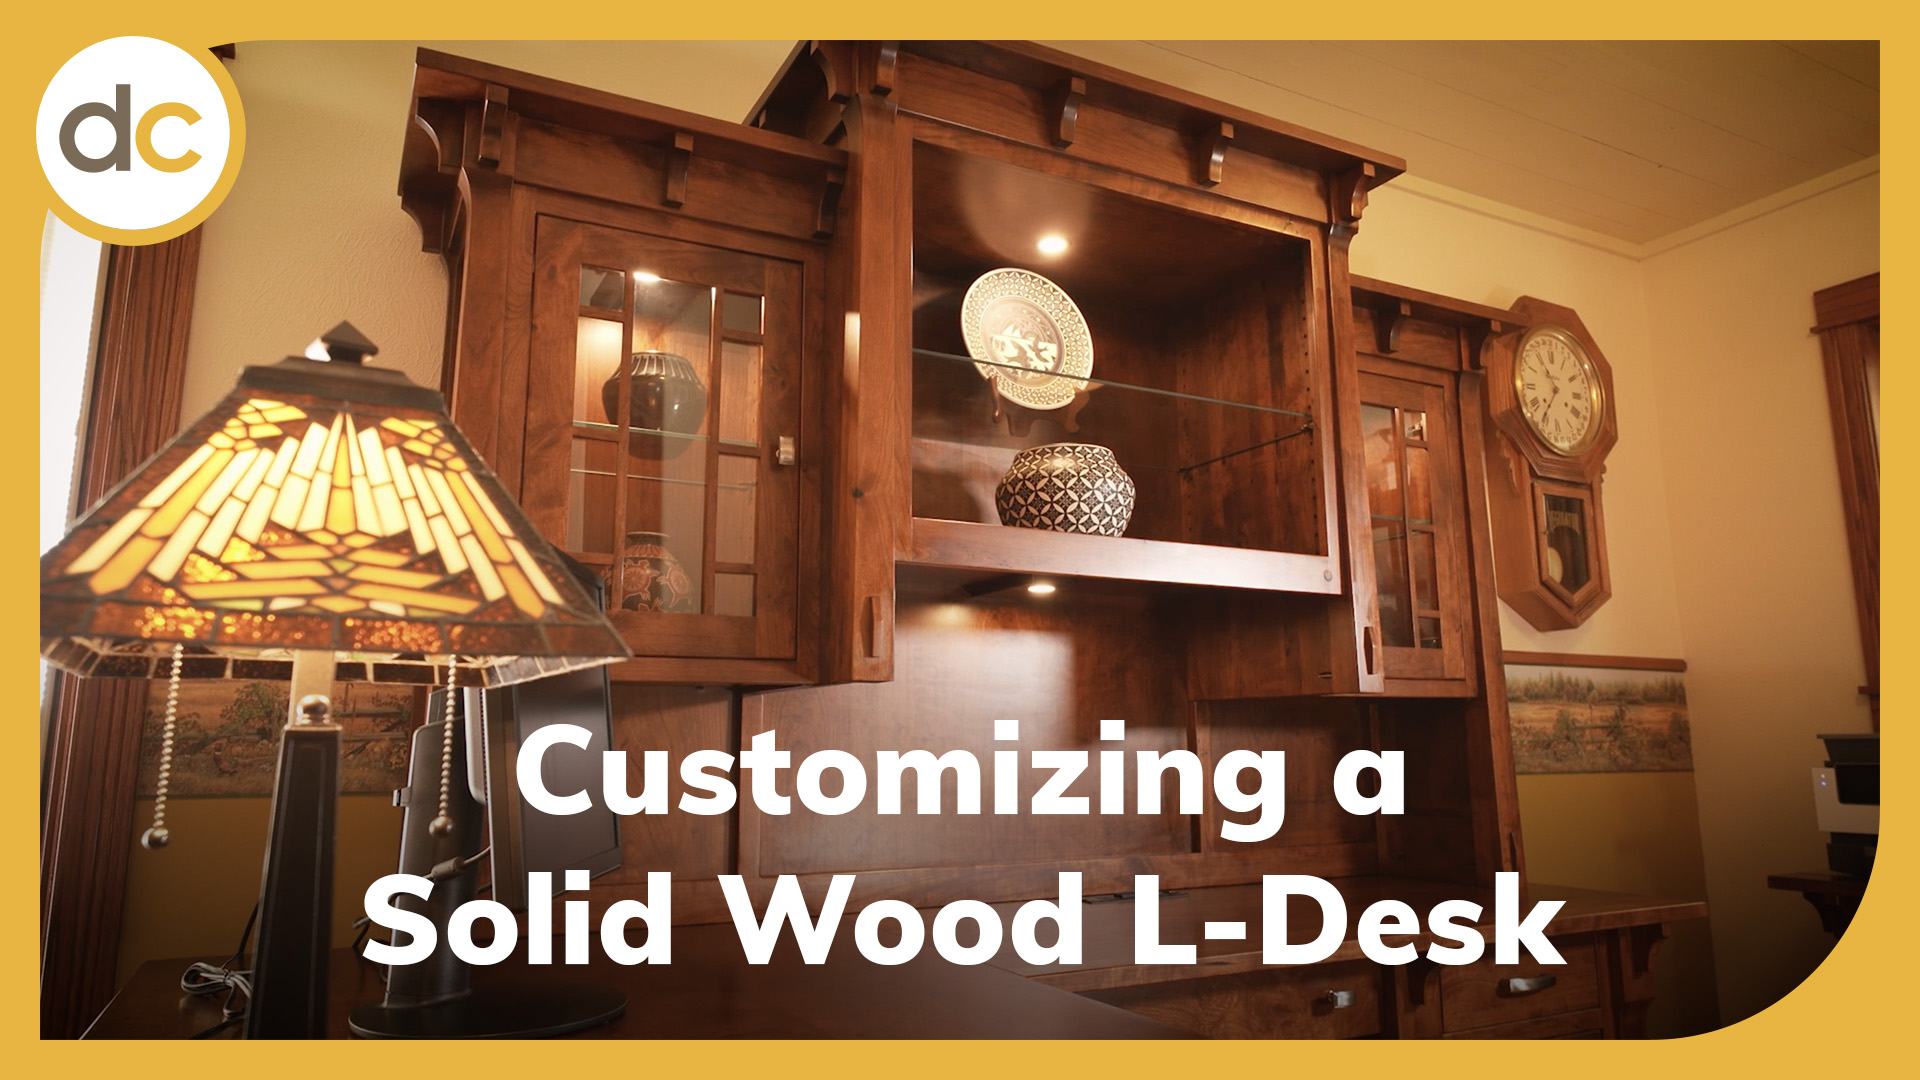 A Desk and Hutch background with the title "Customizing a Solid Wood L-Desk"